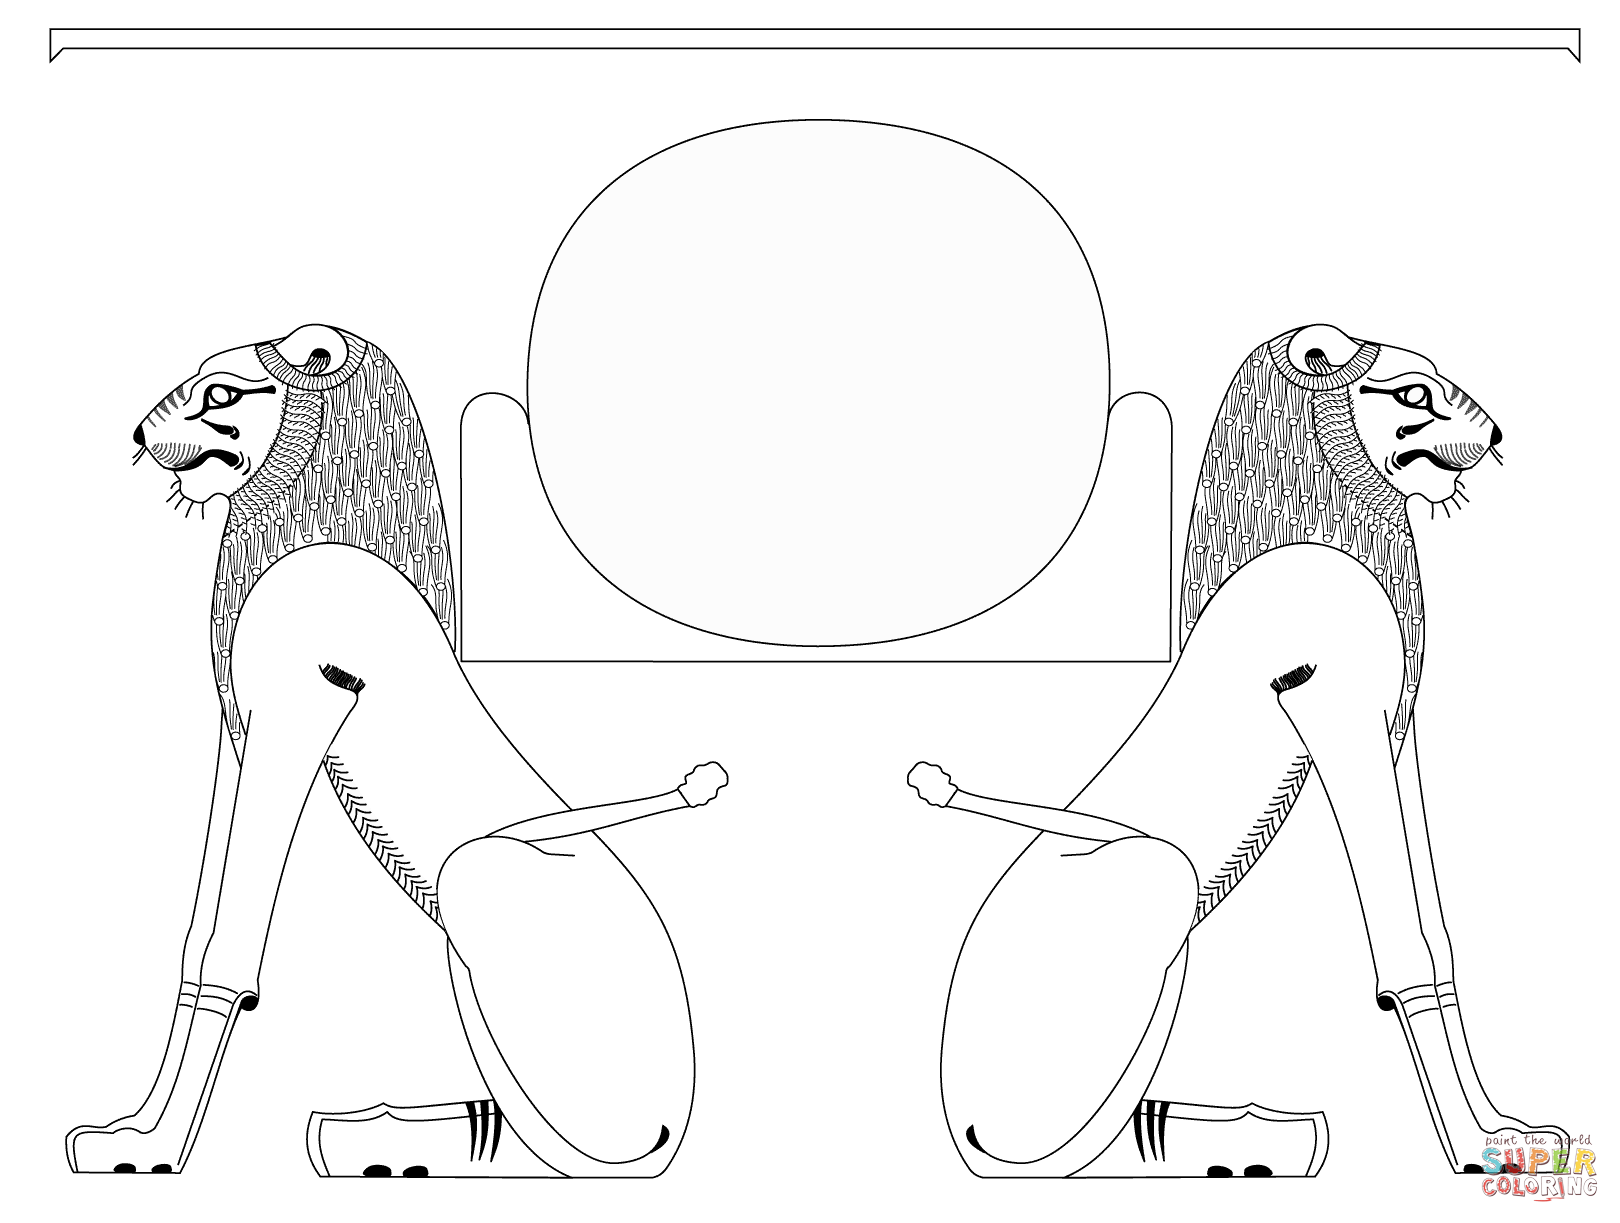 Egypt coloring pages | Free Coloring Pages